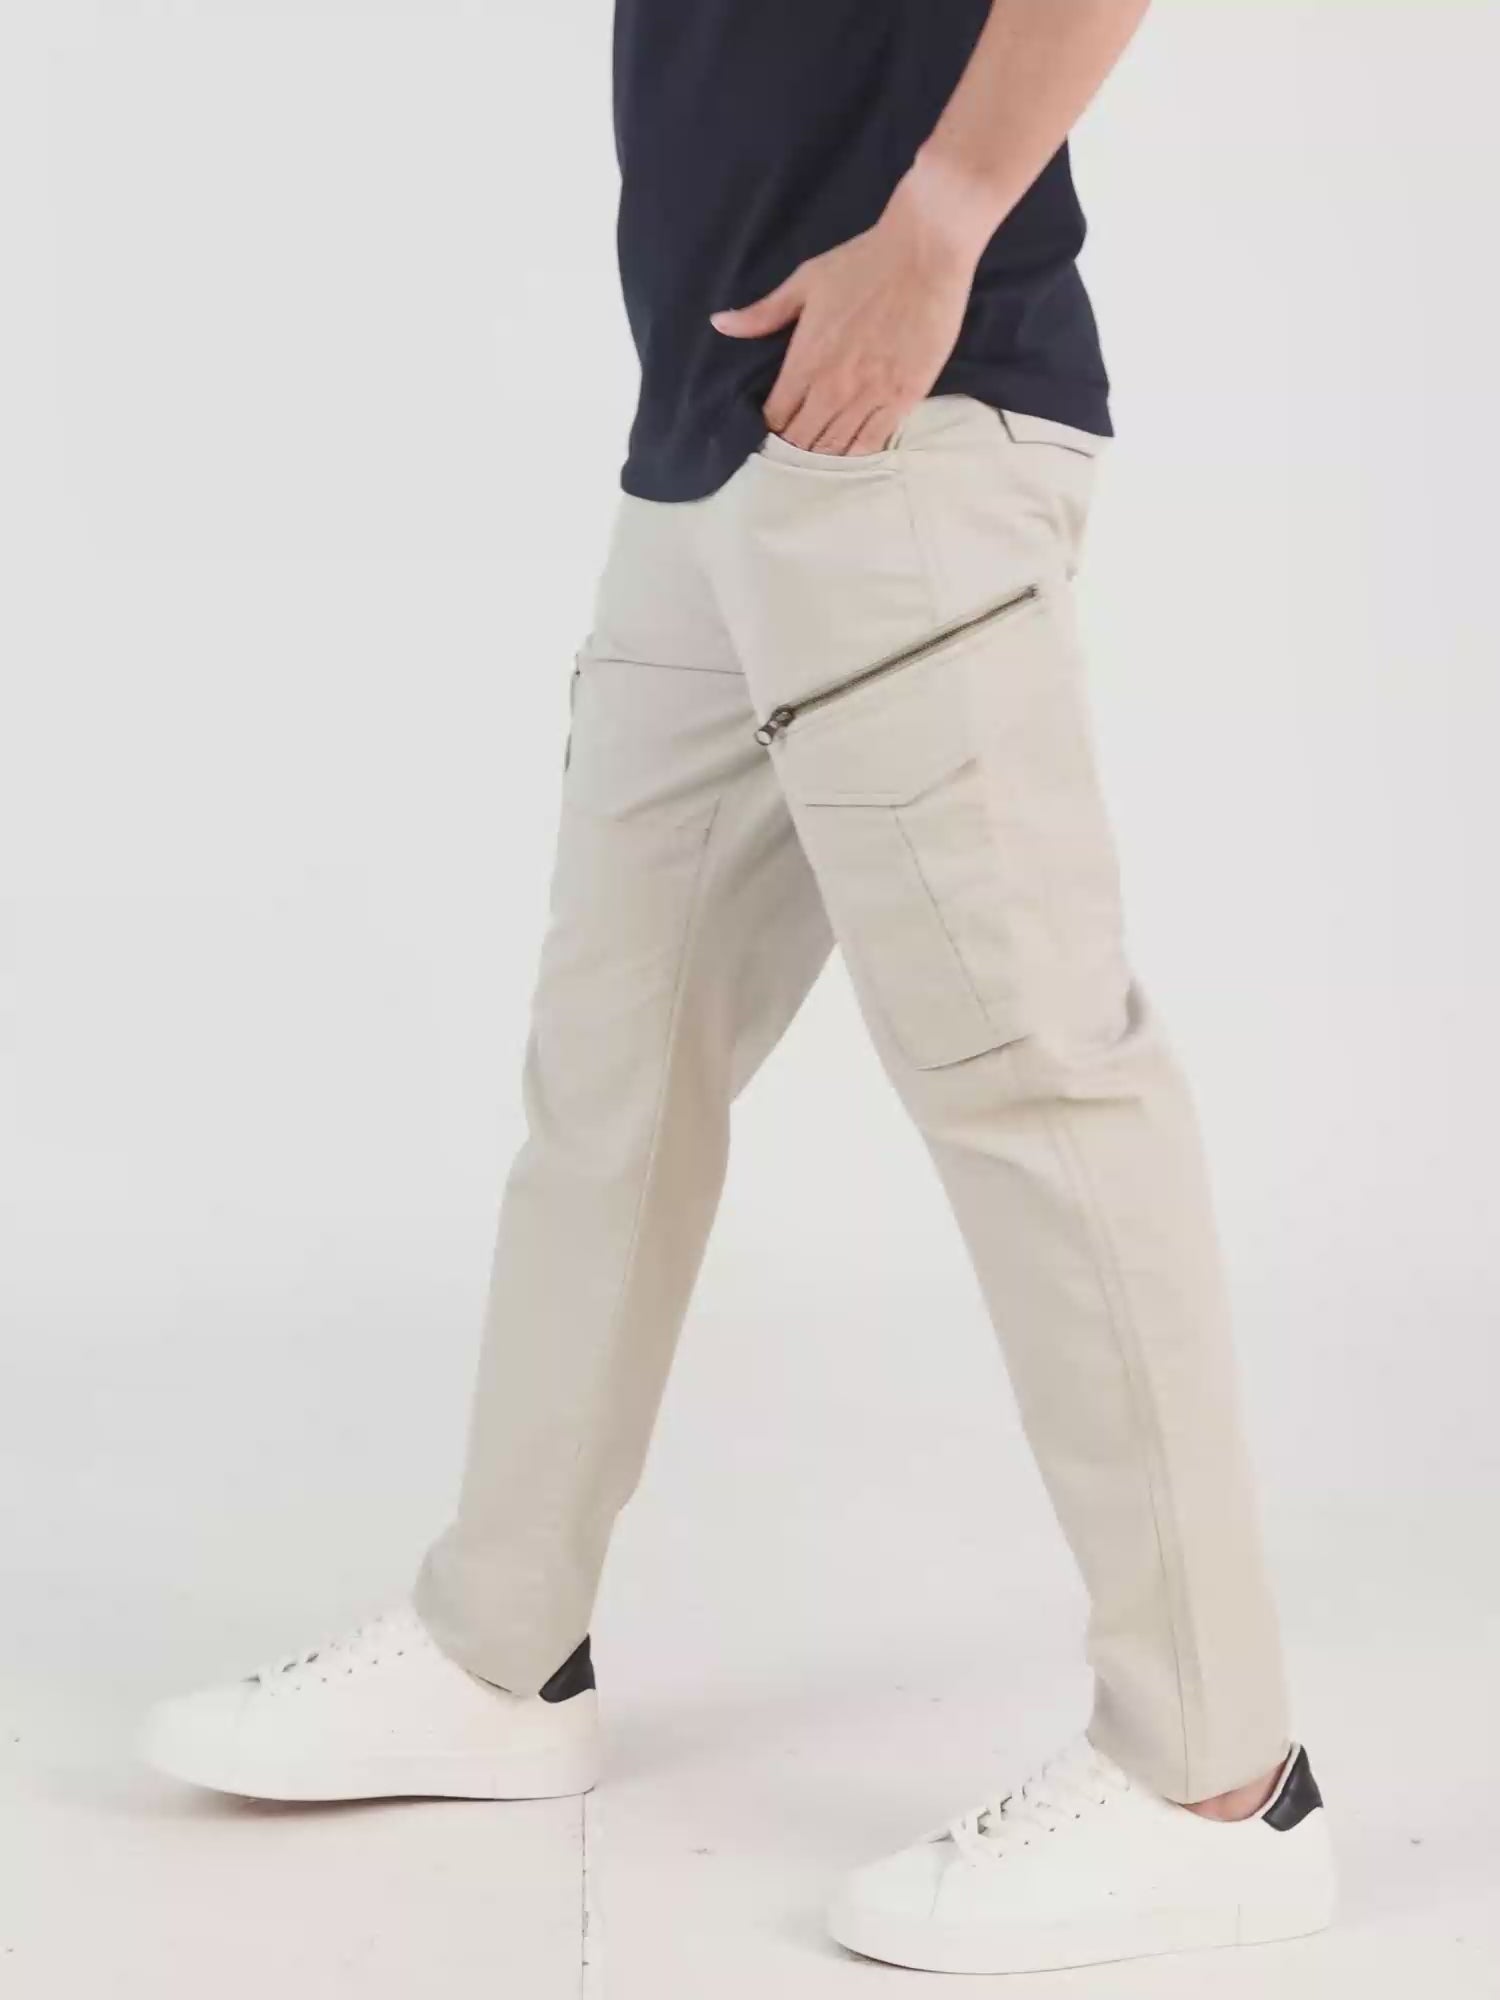 Buy Cargo Fleece Pants Men's Jeans & Pants from SWITCH. Find SWITCH fashion  & more at DrJays.com